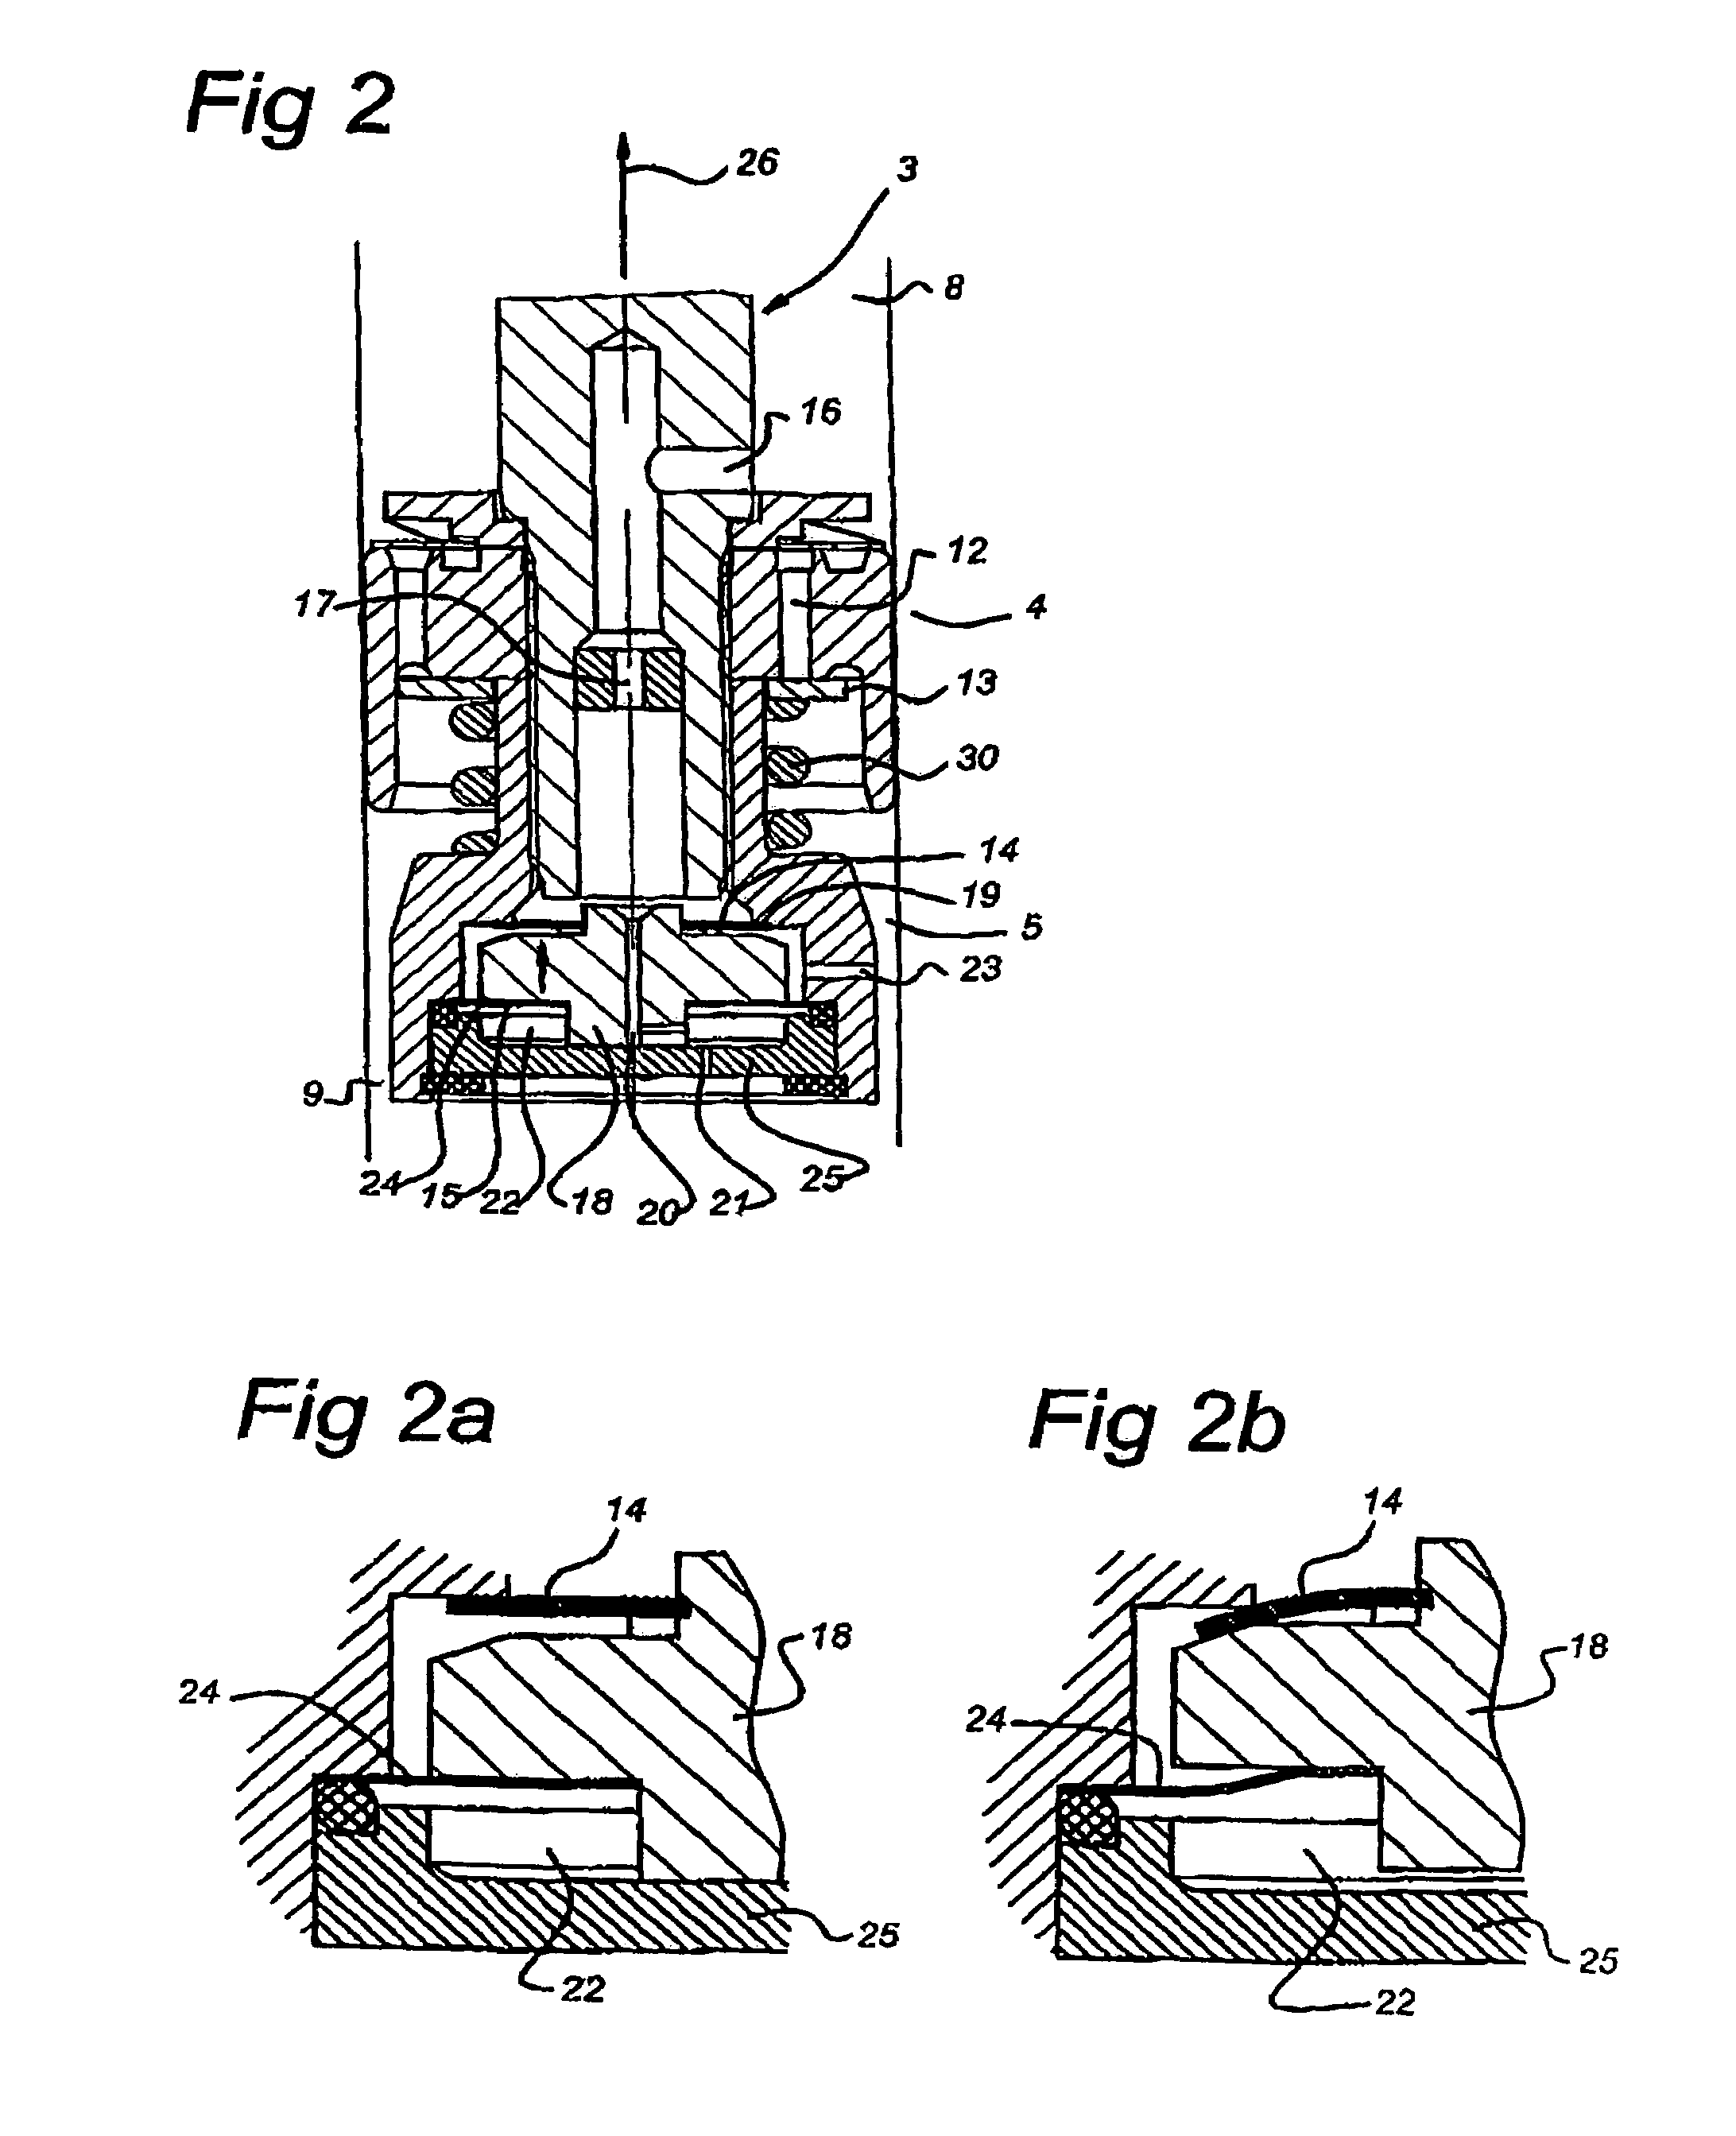 Shock absorber with frequency-dependent damping